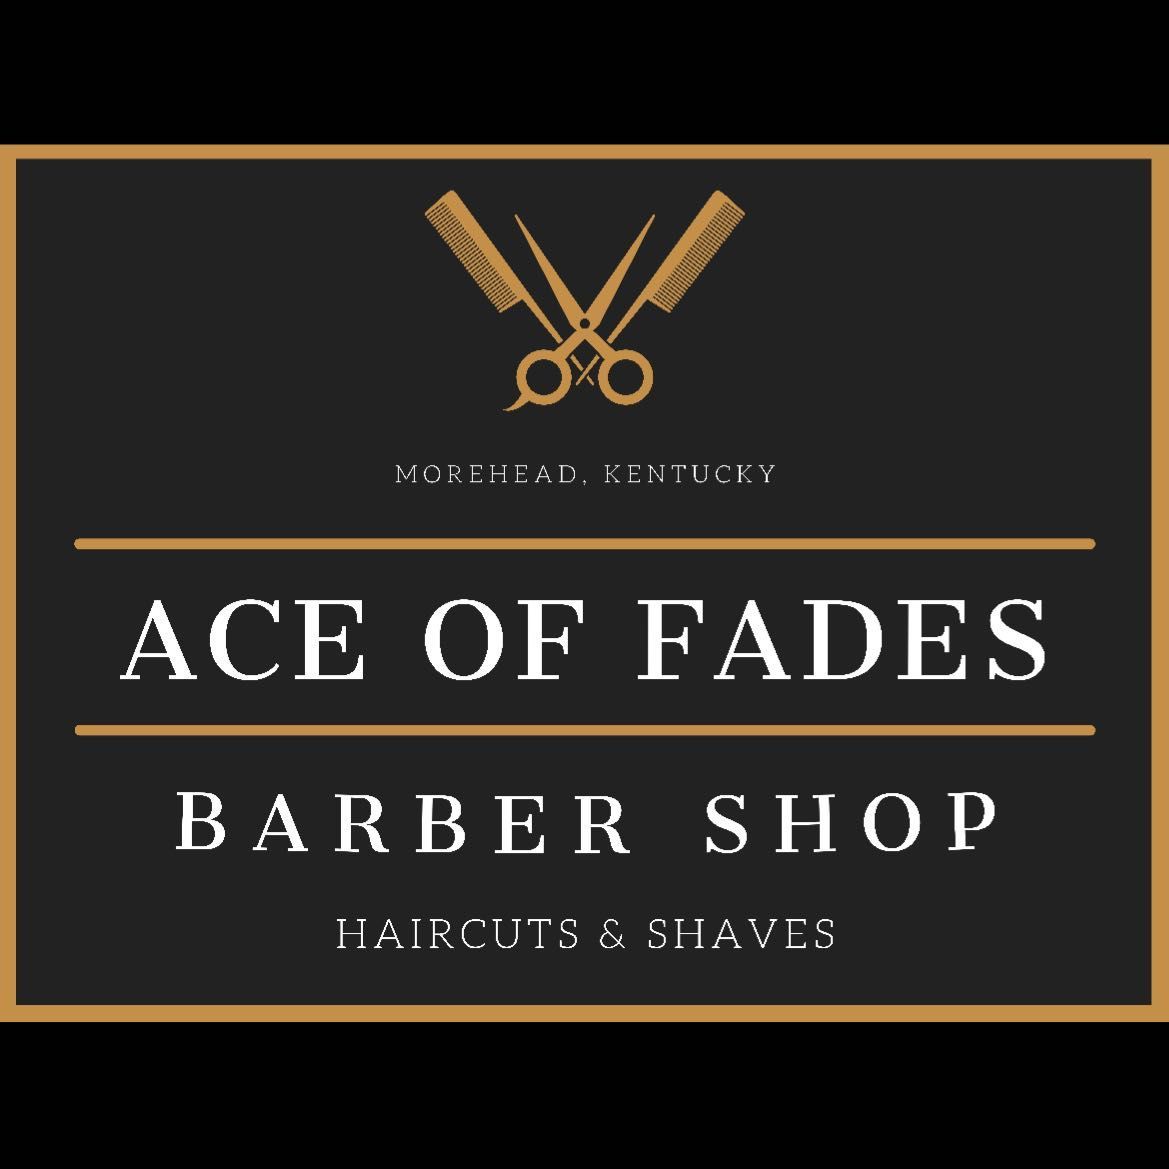 (Kenny) Ace Of Fades Barber Shop, 128 Carey Ave, Suite A, #A, Morehead, 40351